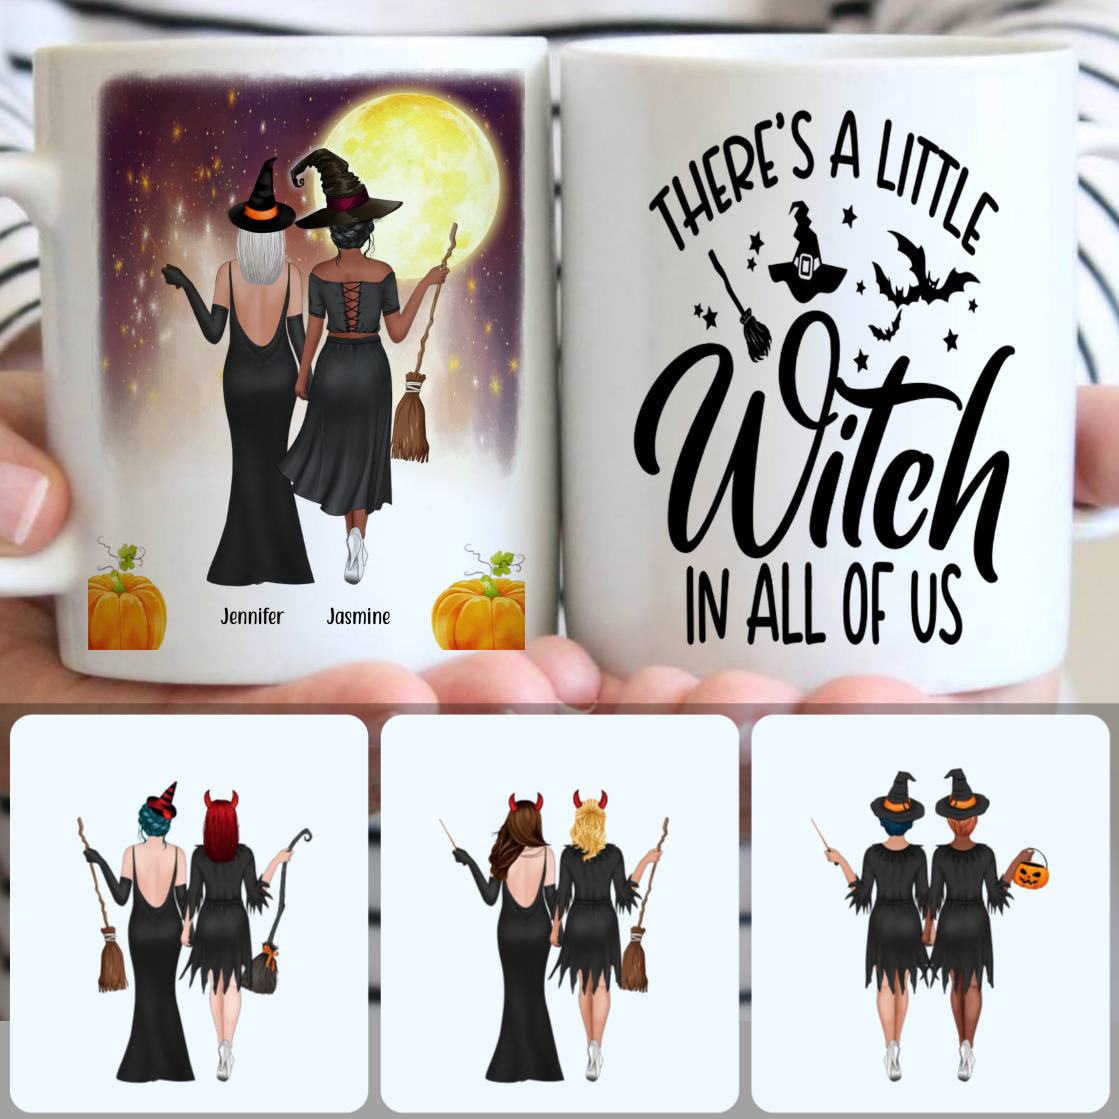 Personalized Mug, Unique Halloween Gifts, 2 Sisters - A Little Witch Customized Coffee Mug With Names